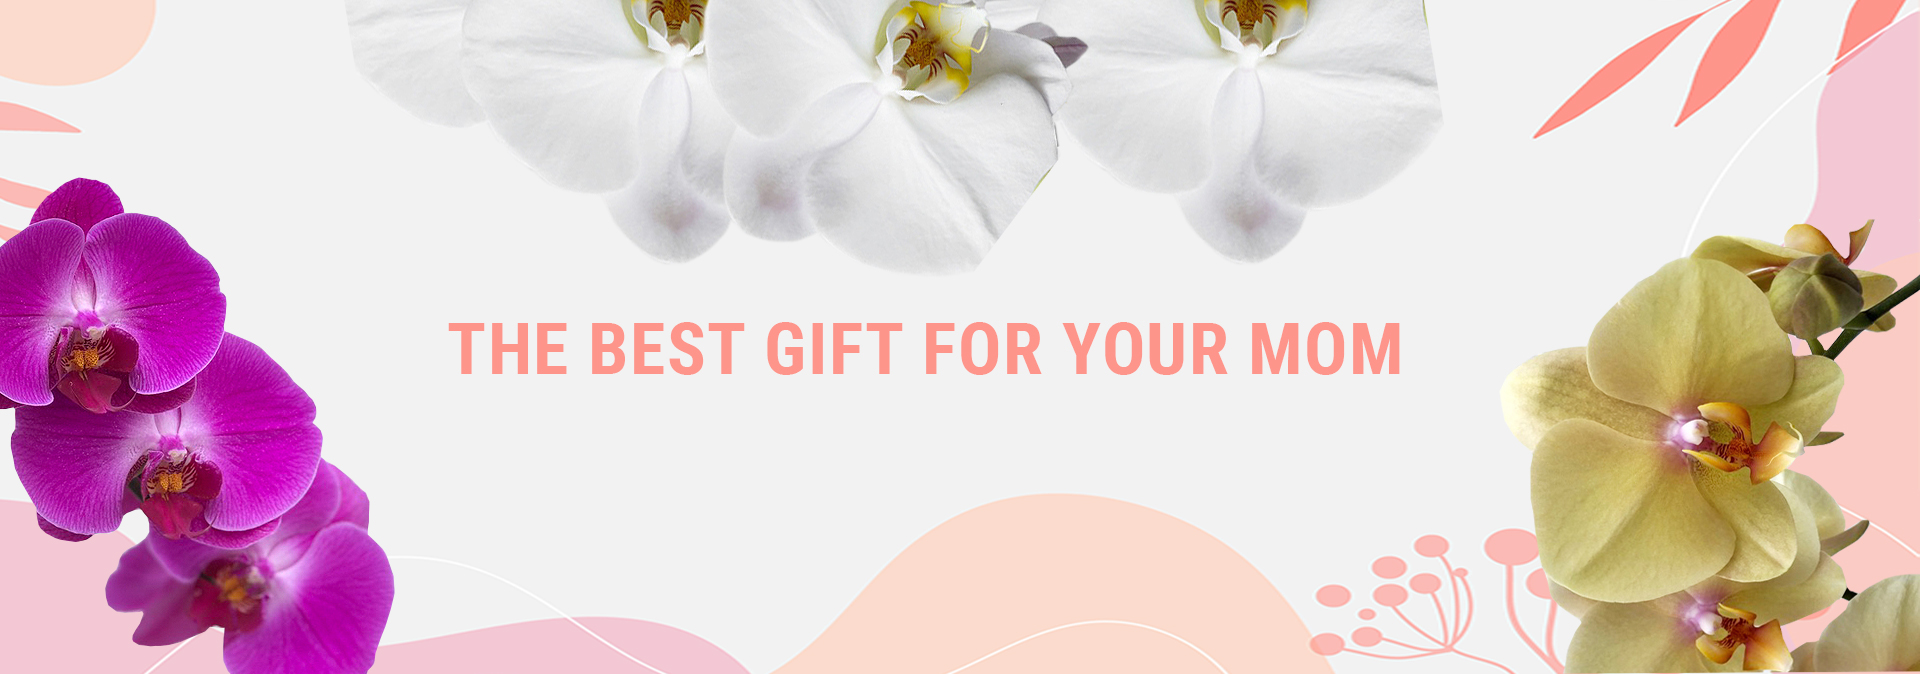 the best gift for you mom